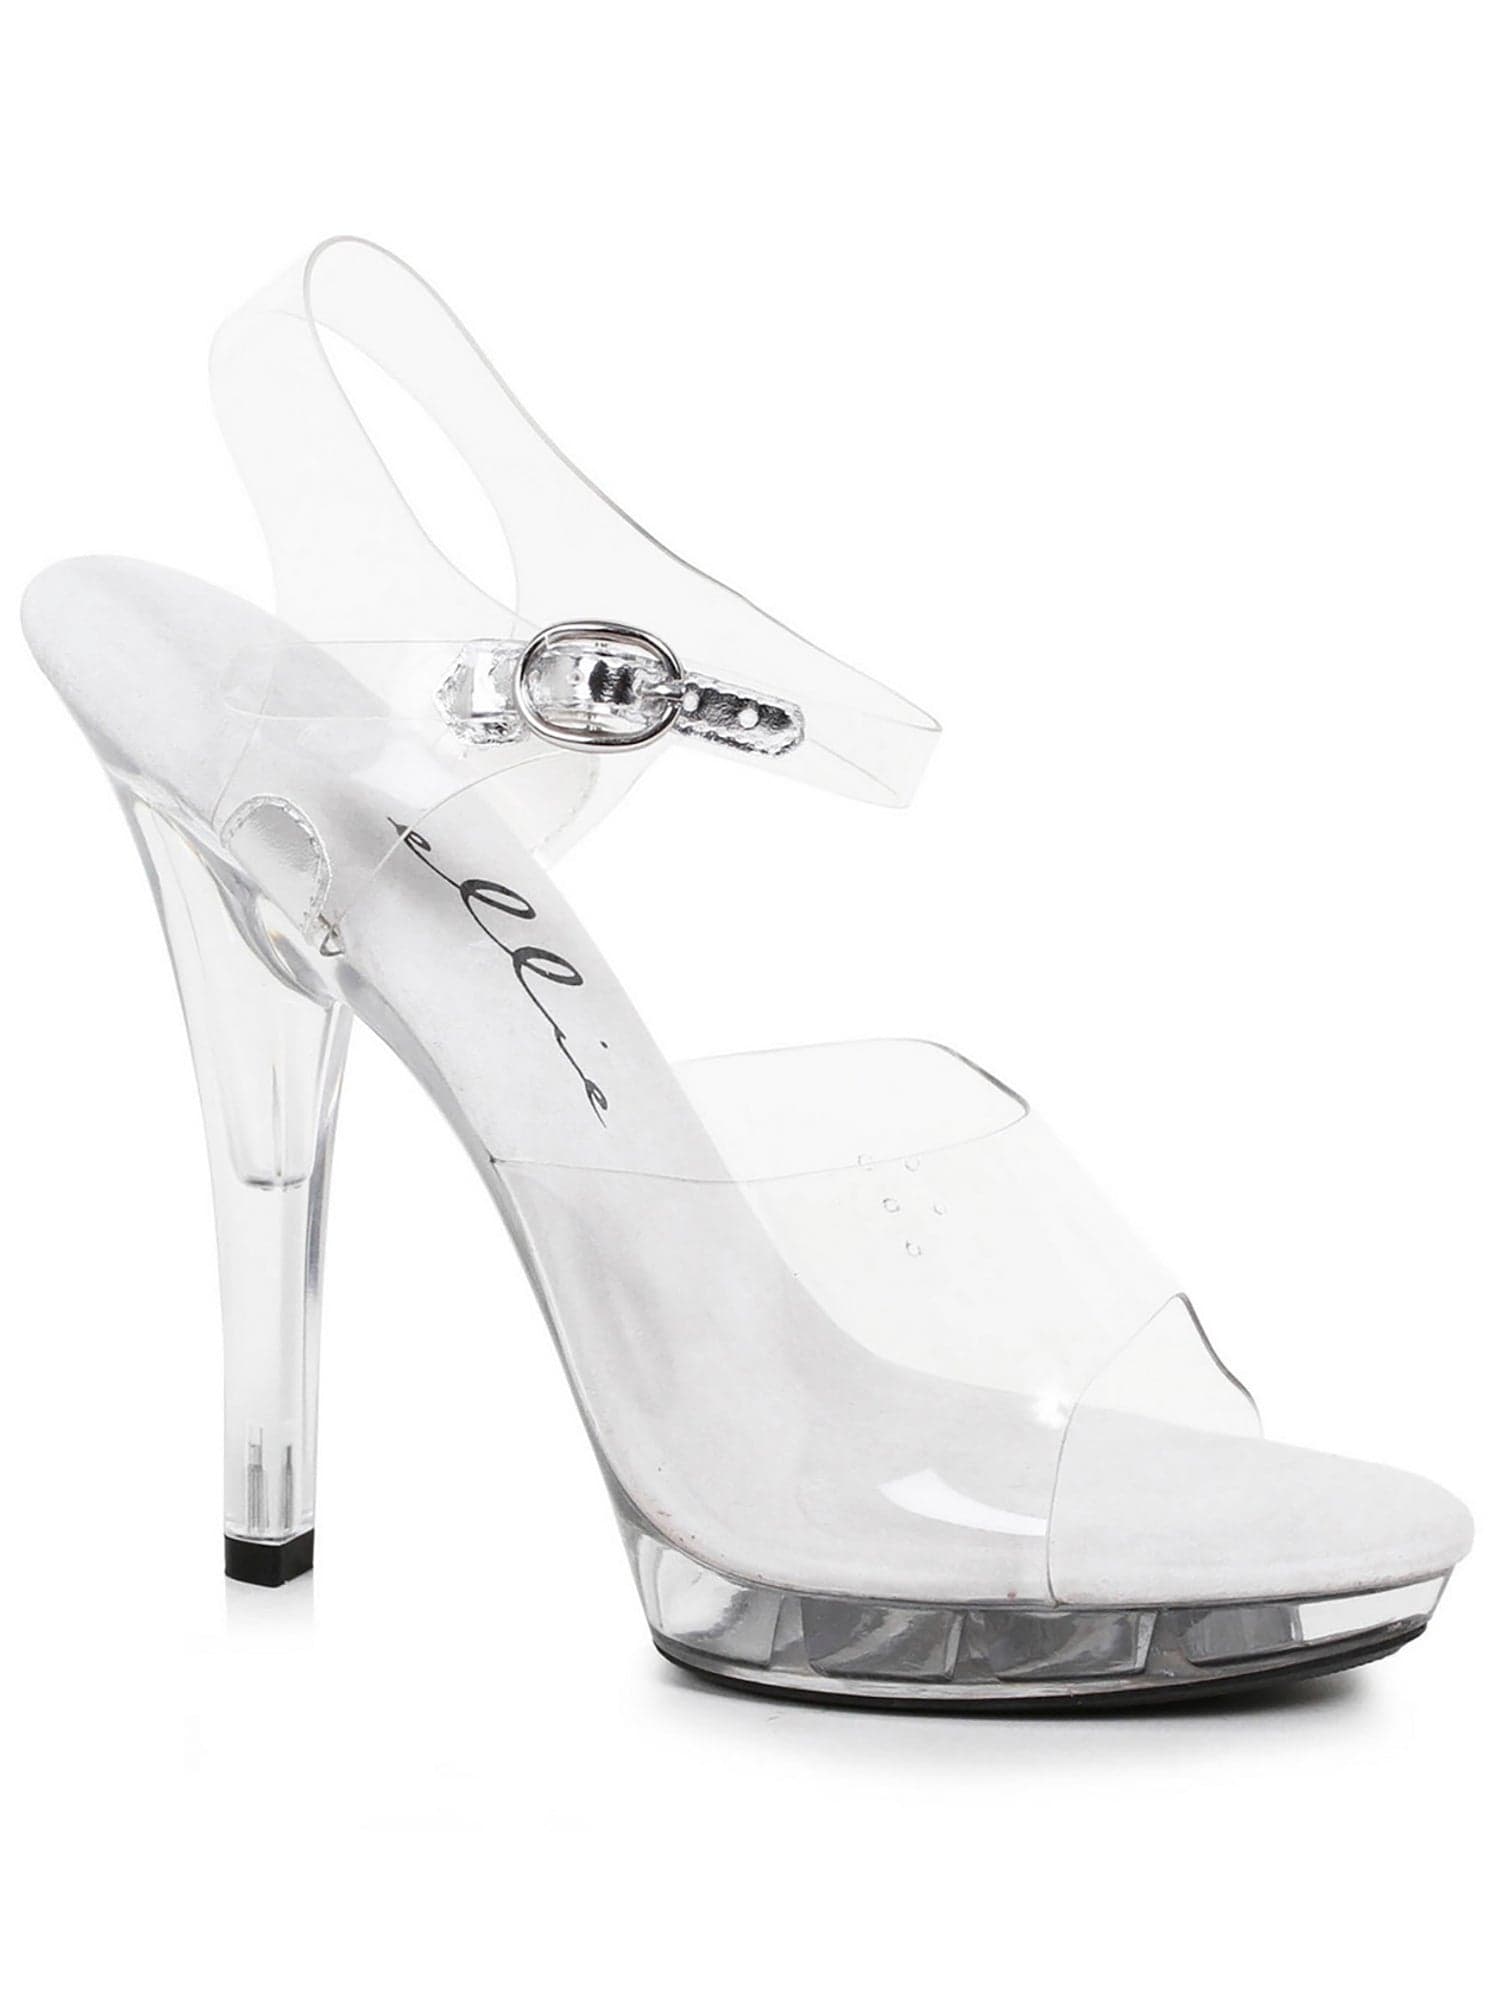 Adult Sexy Clear Stiletto Heeled Shoes - costumes.com